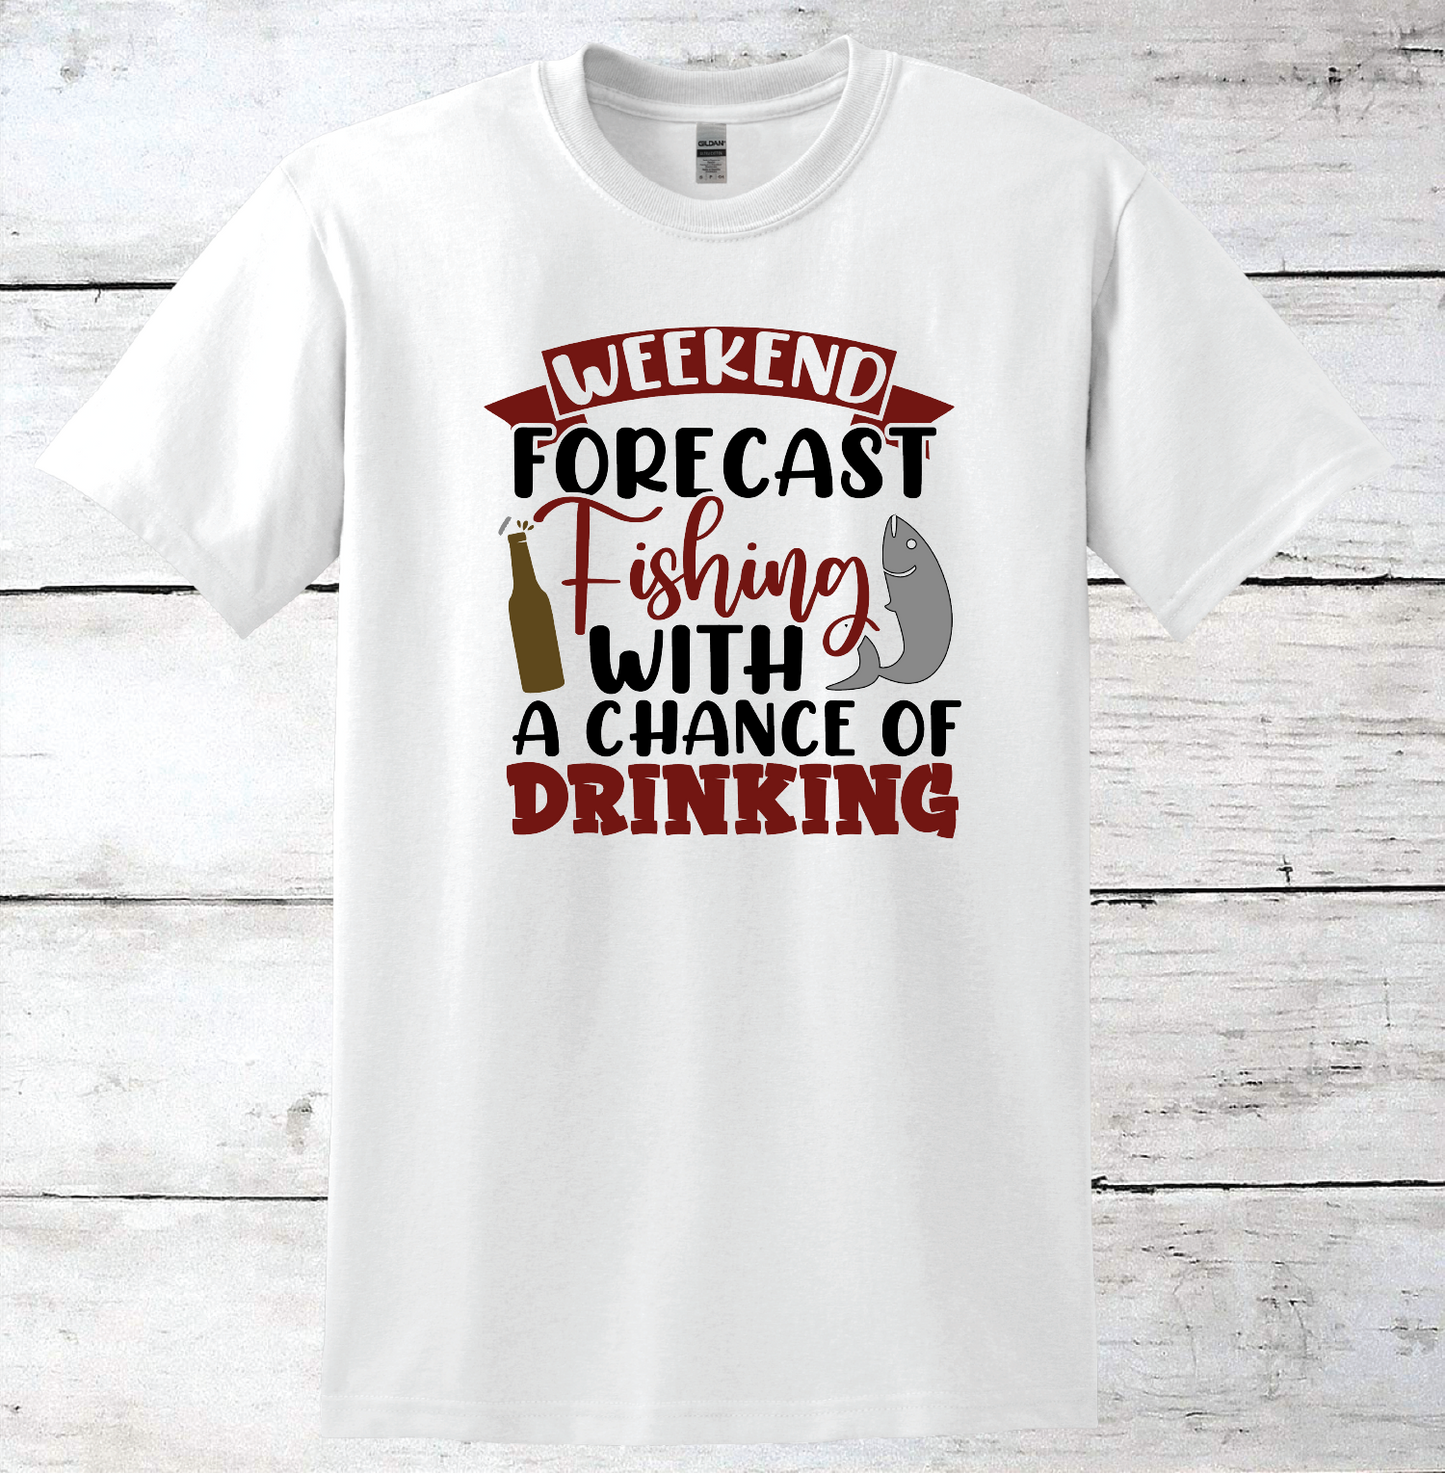 Weekend Forecast Fishing with a Chance of Drinking T- Shirt